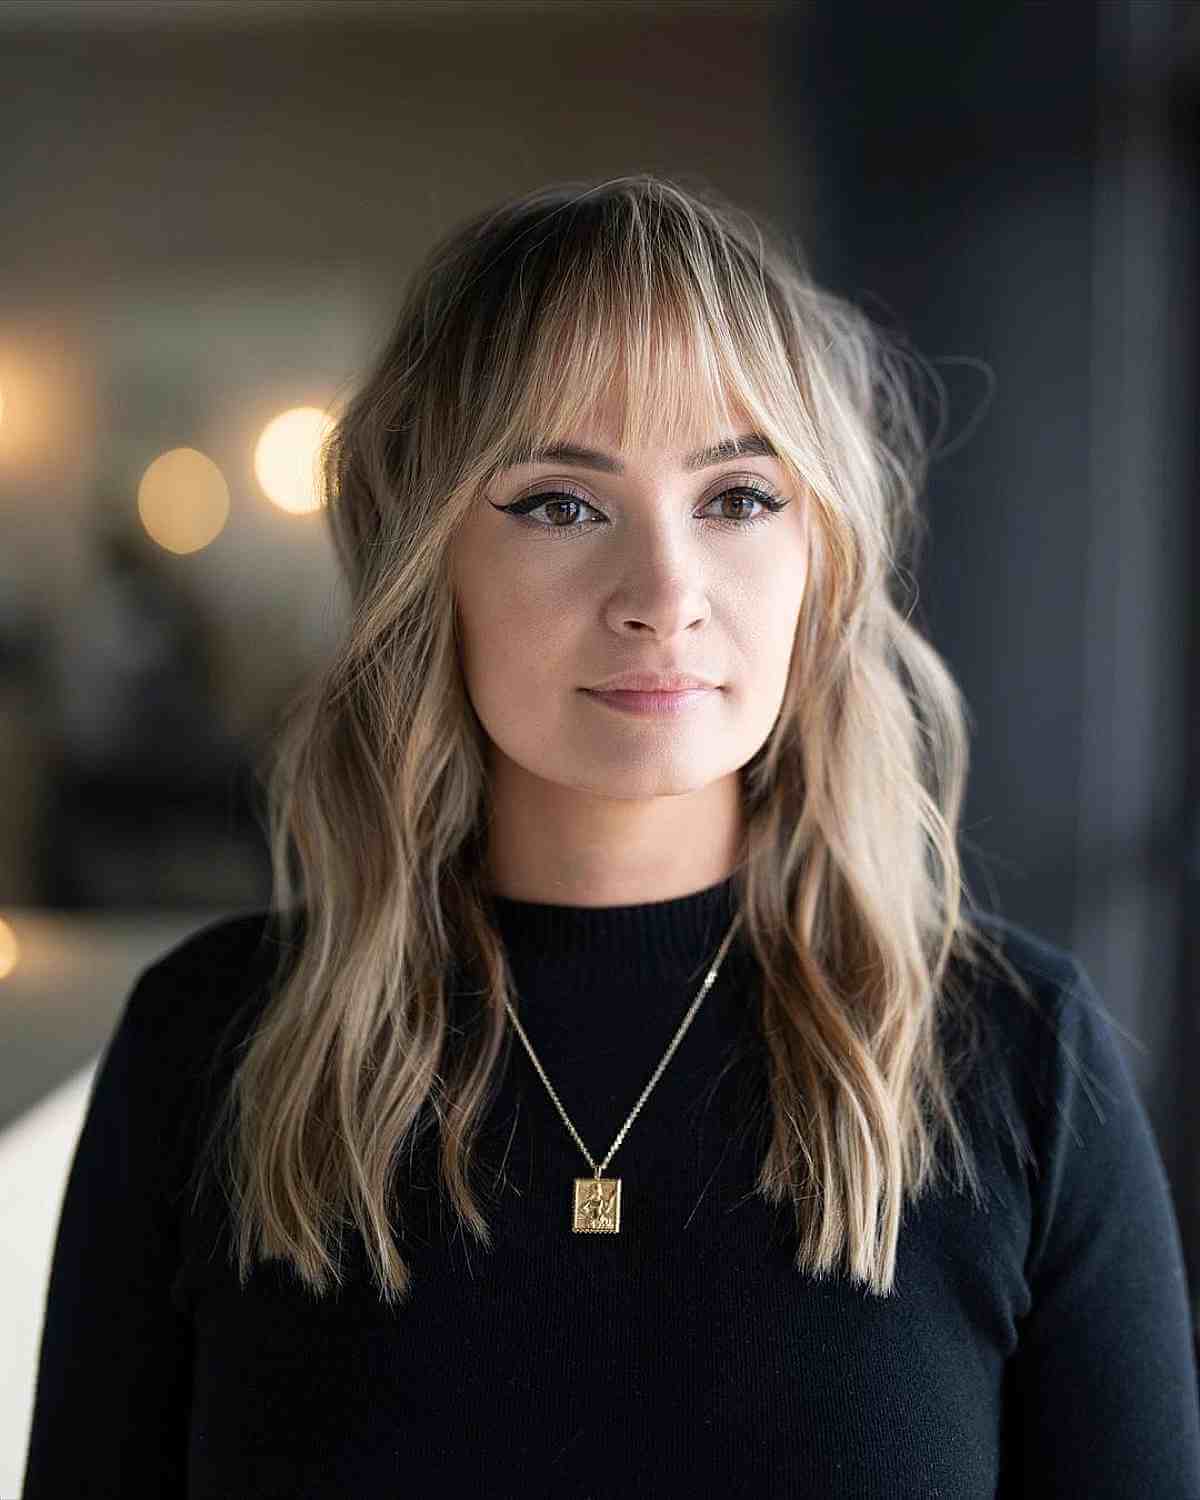 Wispy Bangs on Mid-Length Hair for Square Faces